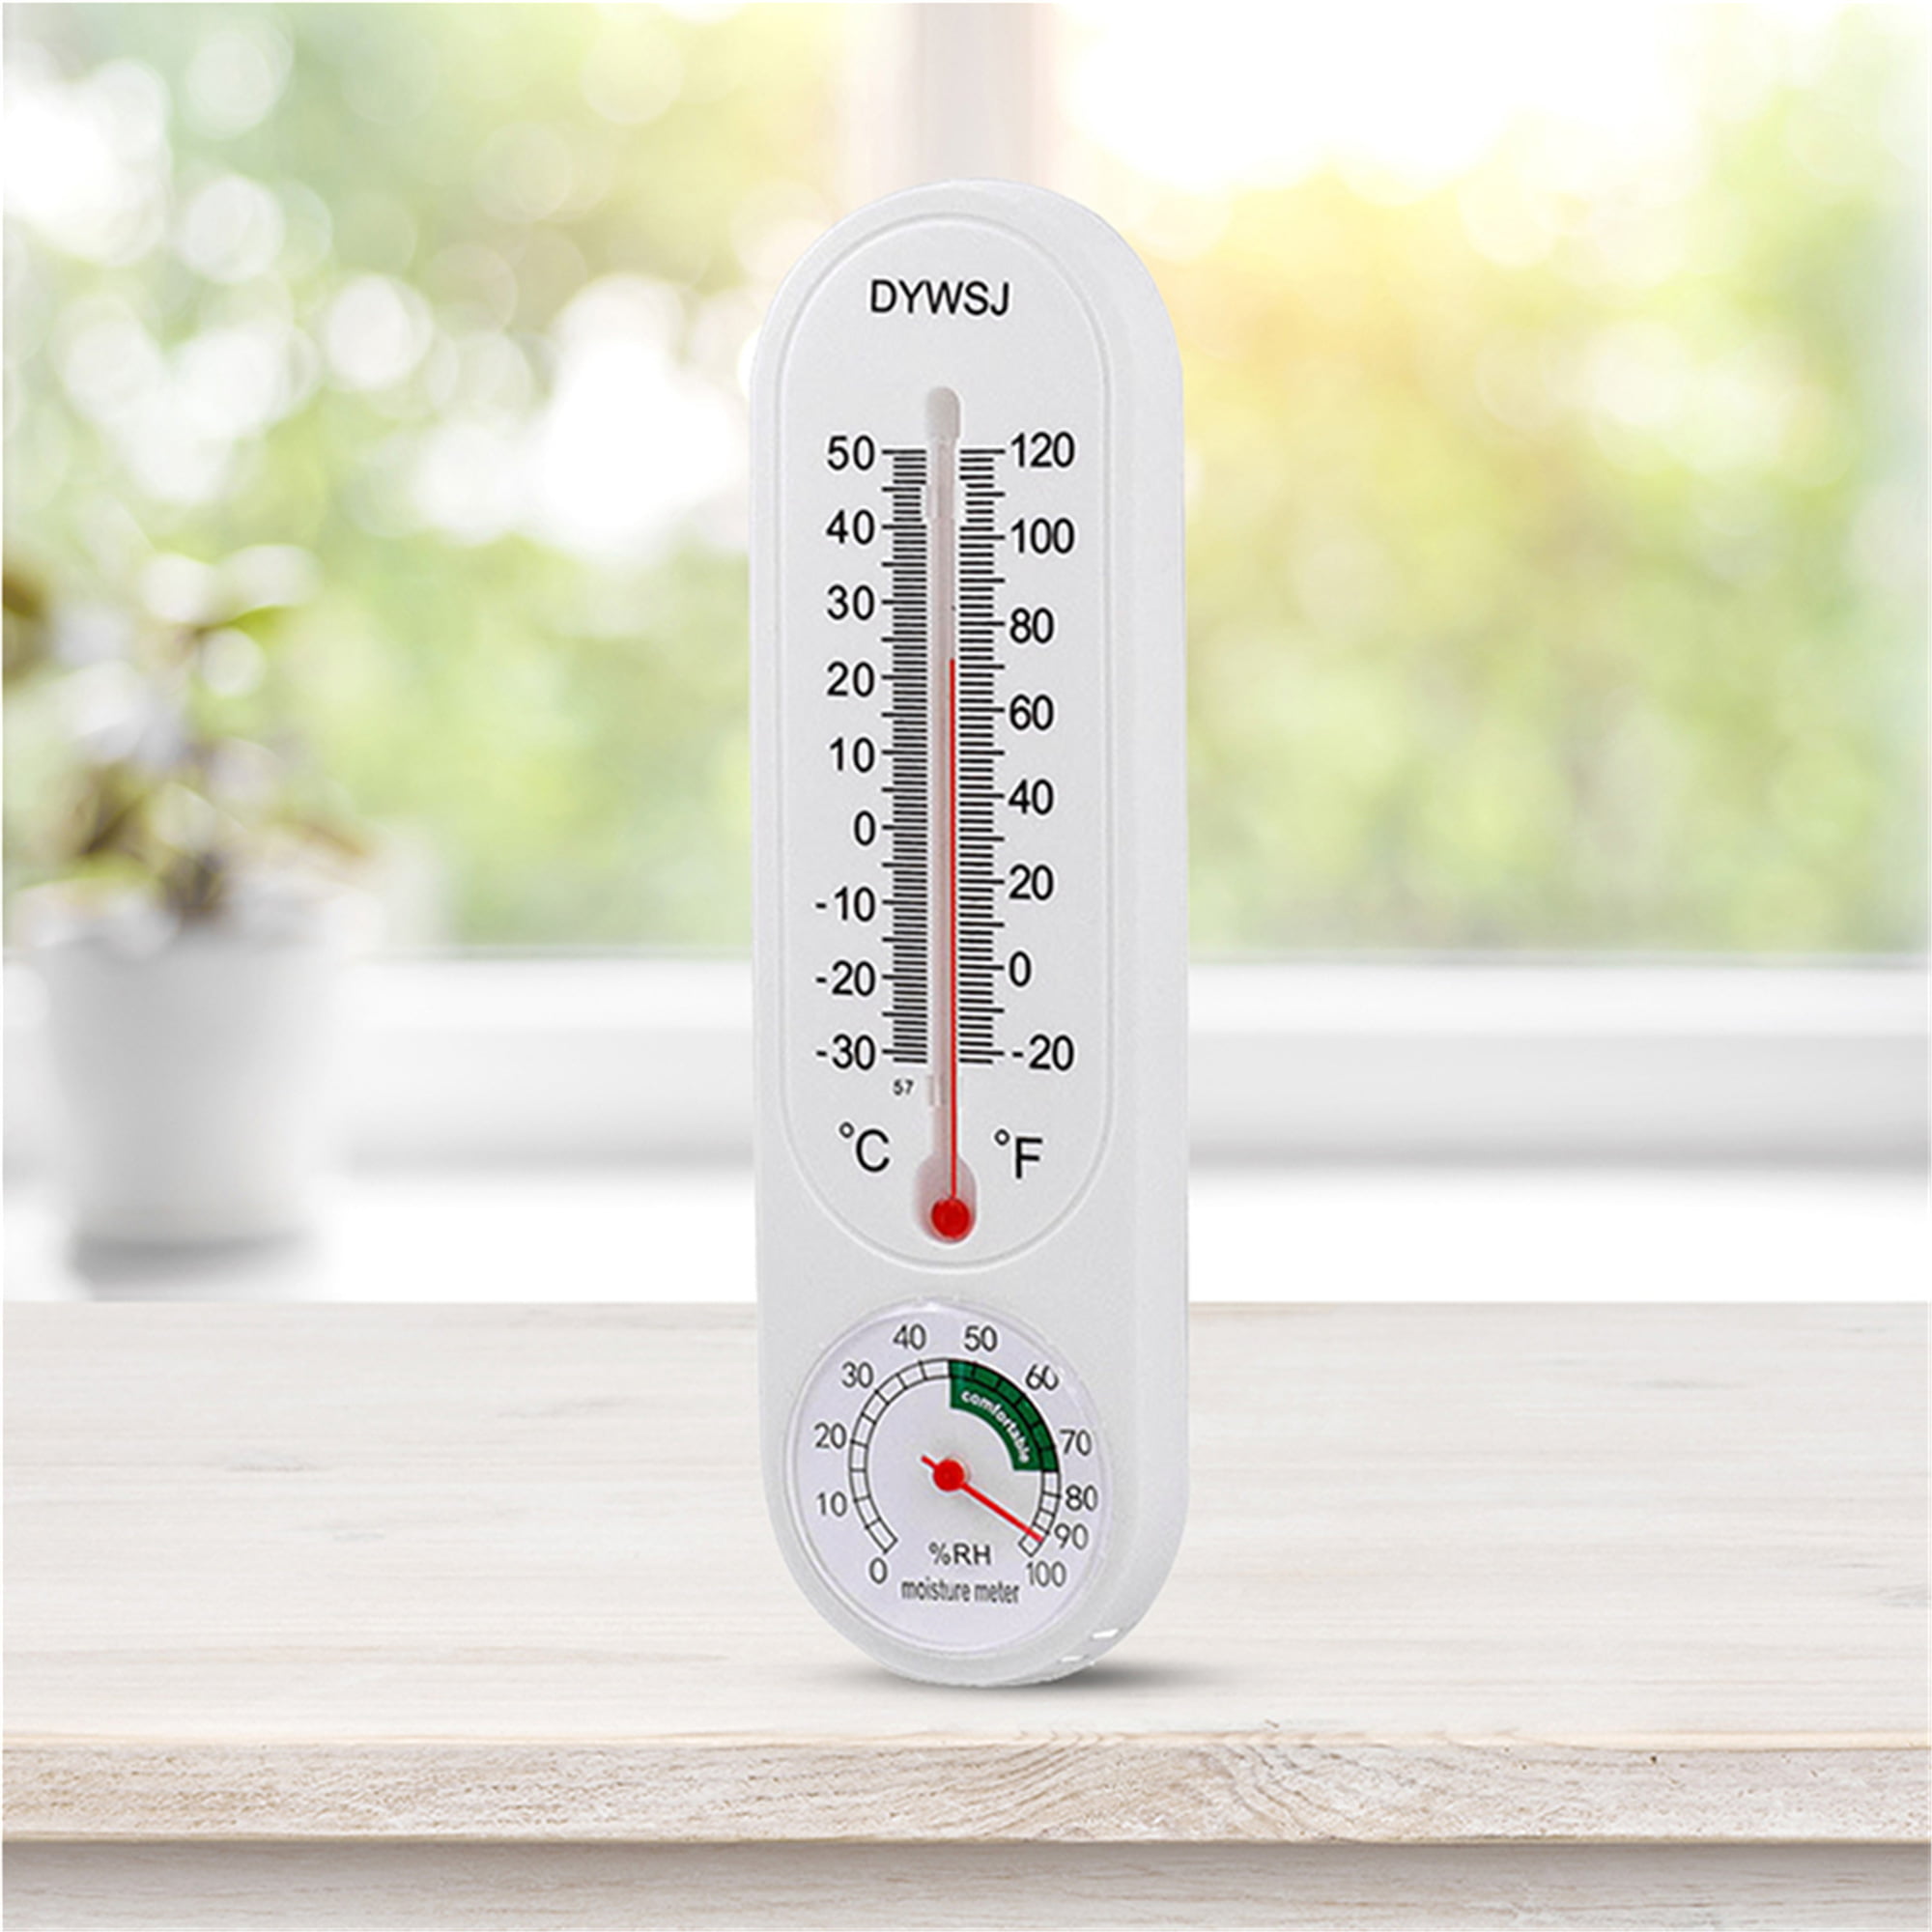 Waterproof Measuring Gauge, Thermometer And Hygrometer For Greenhouse, Outdoor  Window, Garden Clear Window Thermometer Glued On Glass